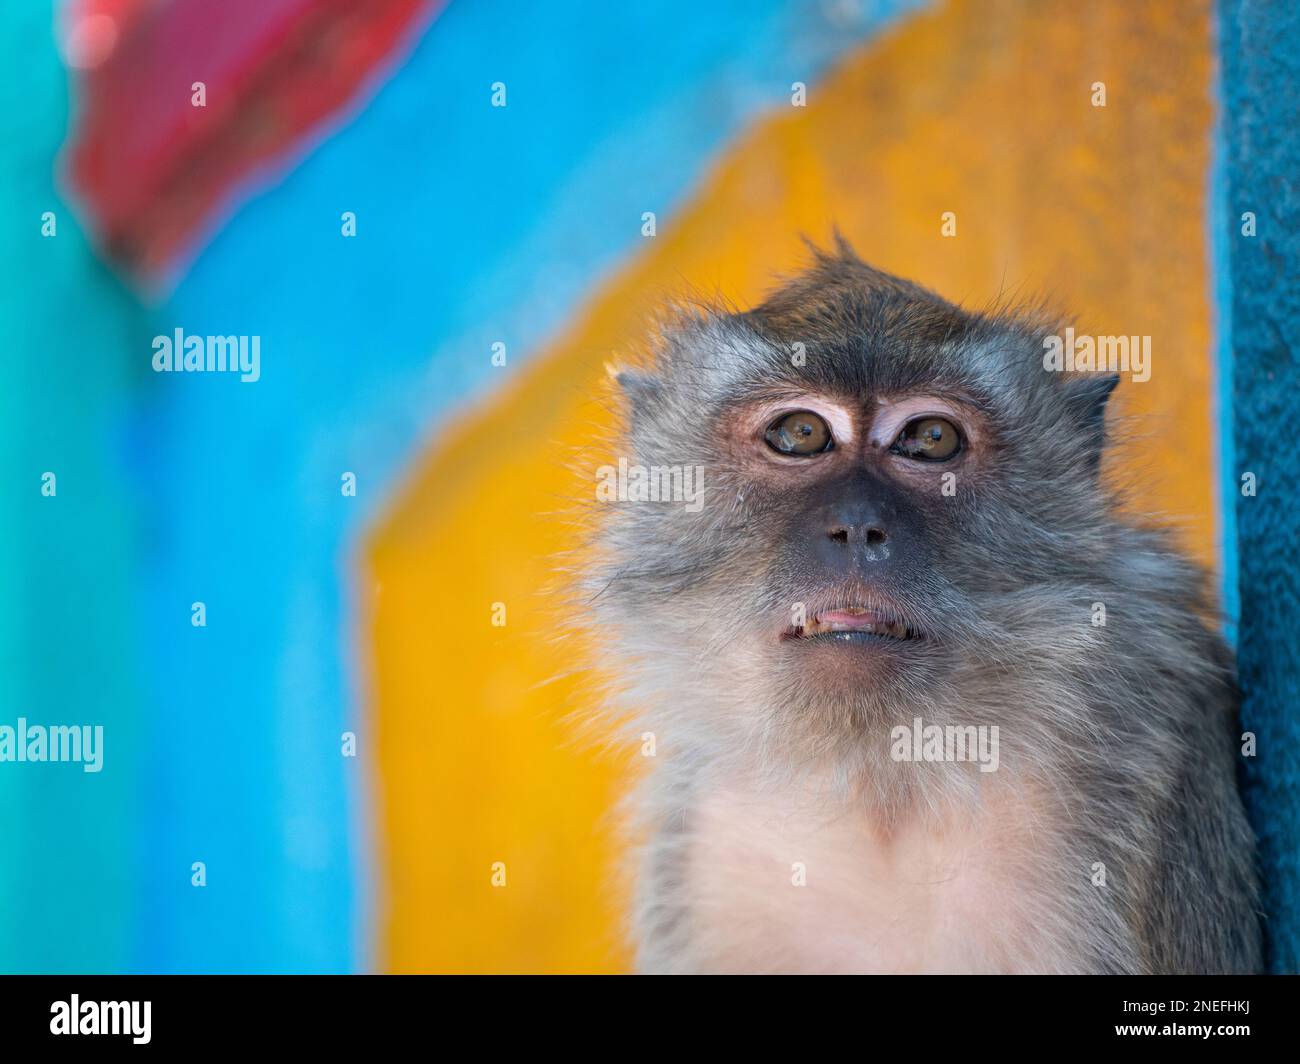 A long-tailed macaque looks into the camera at Batu Caves. Stock Photo